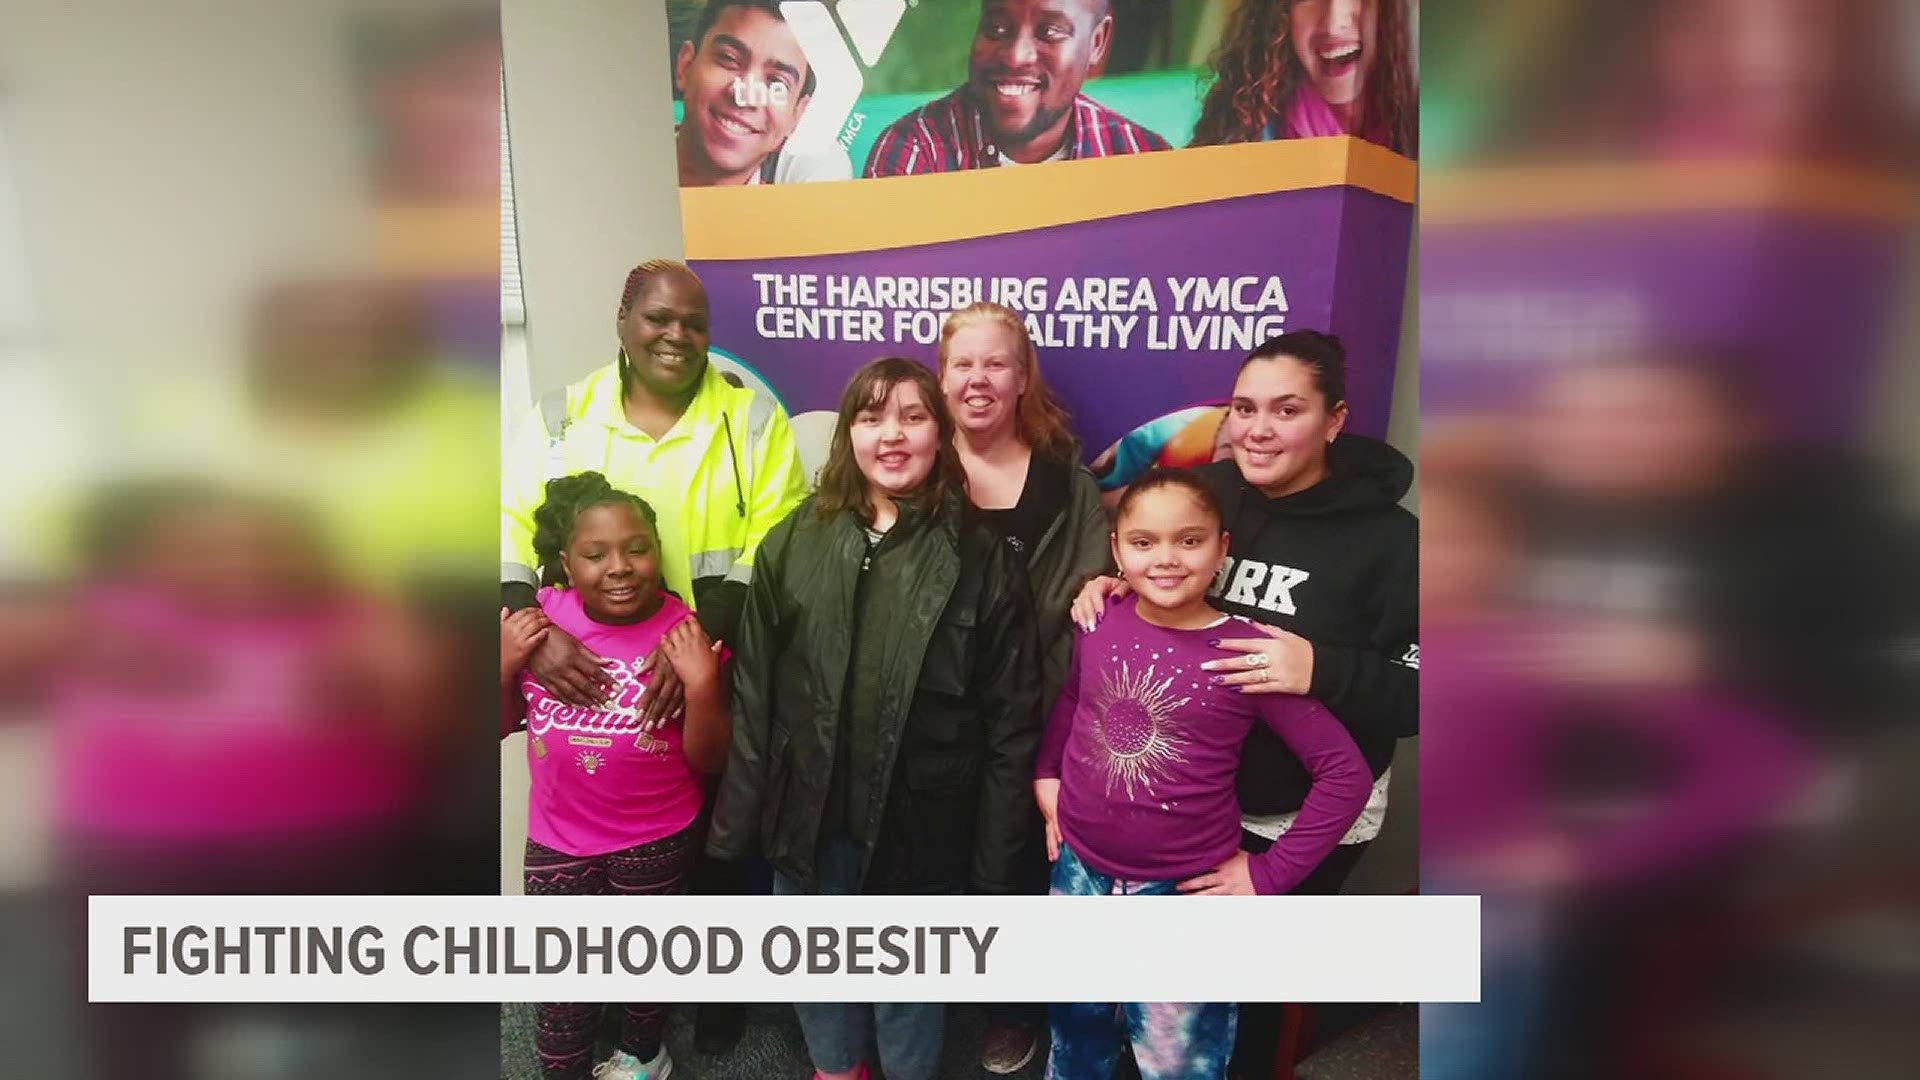 Eric Rothermel, of the Harrisburg Area YMCA, spoke with FOX43 on June 9 about the center's programming that's aimed at promoting healthy habits in children.